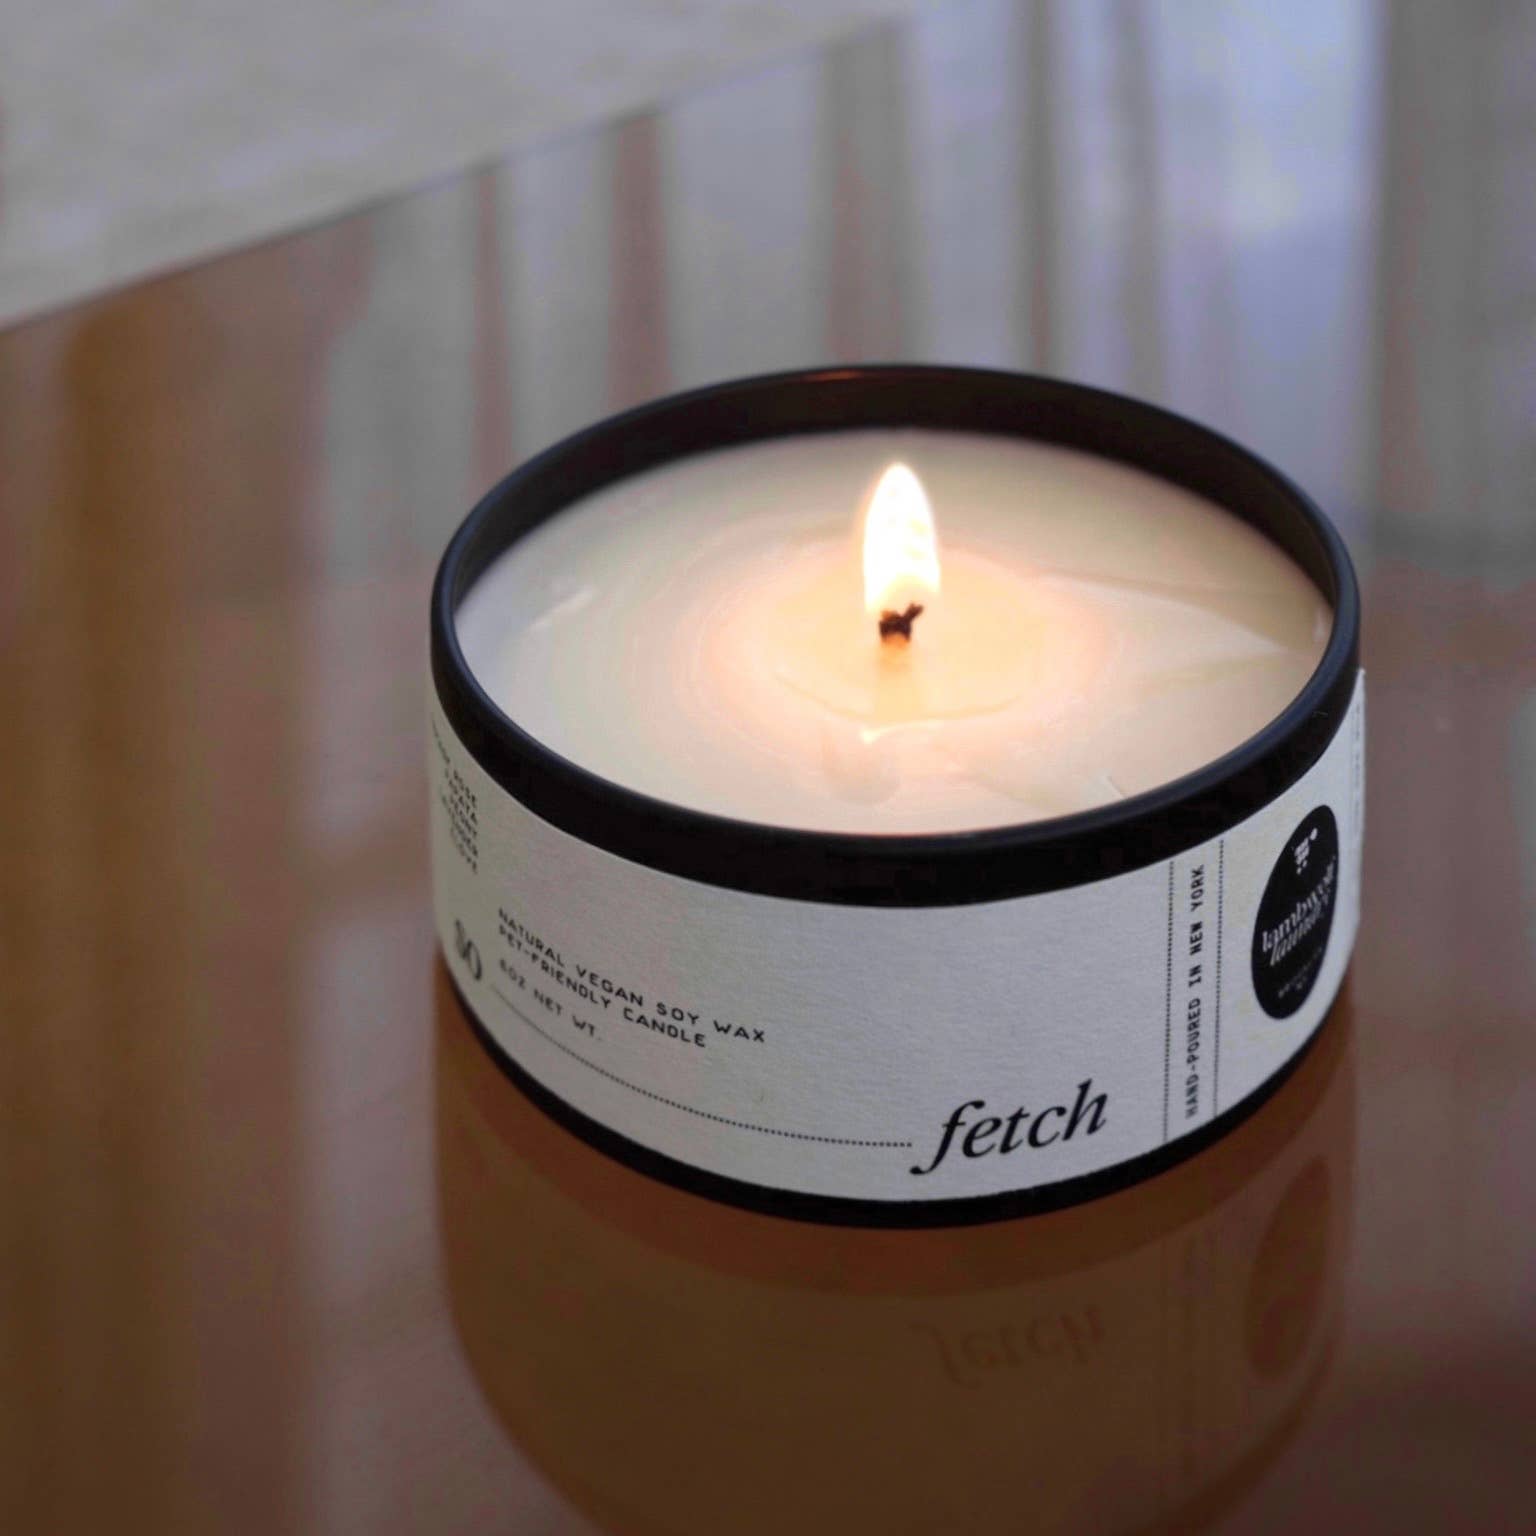 So Fetch Candle// Made in NY // Dog Friendly Scent